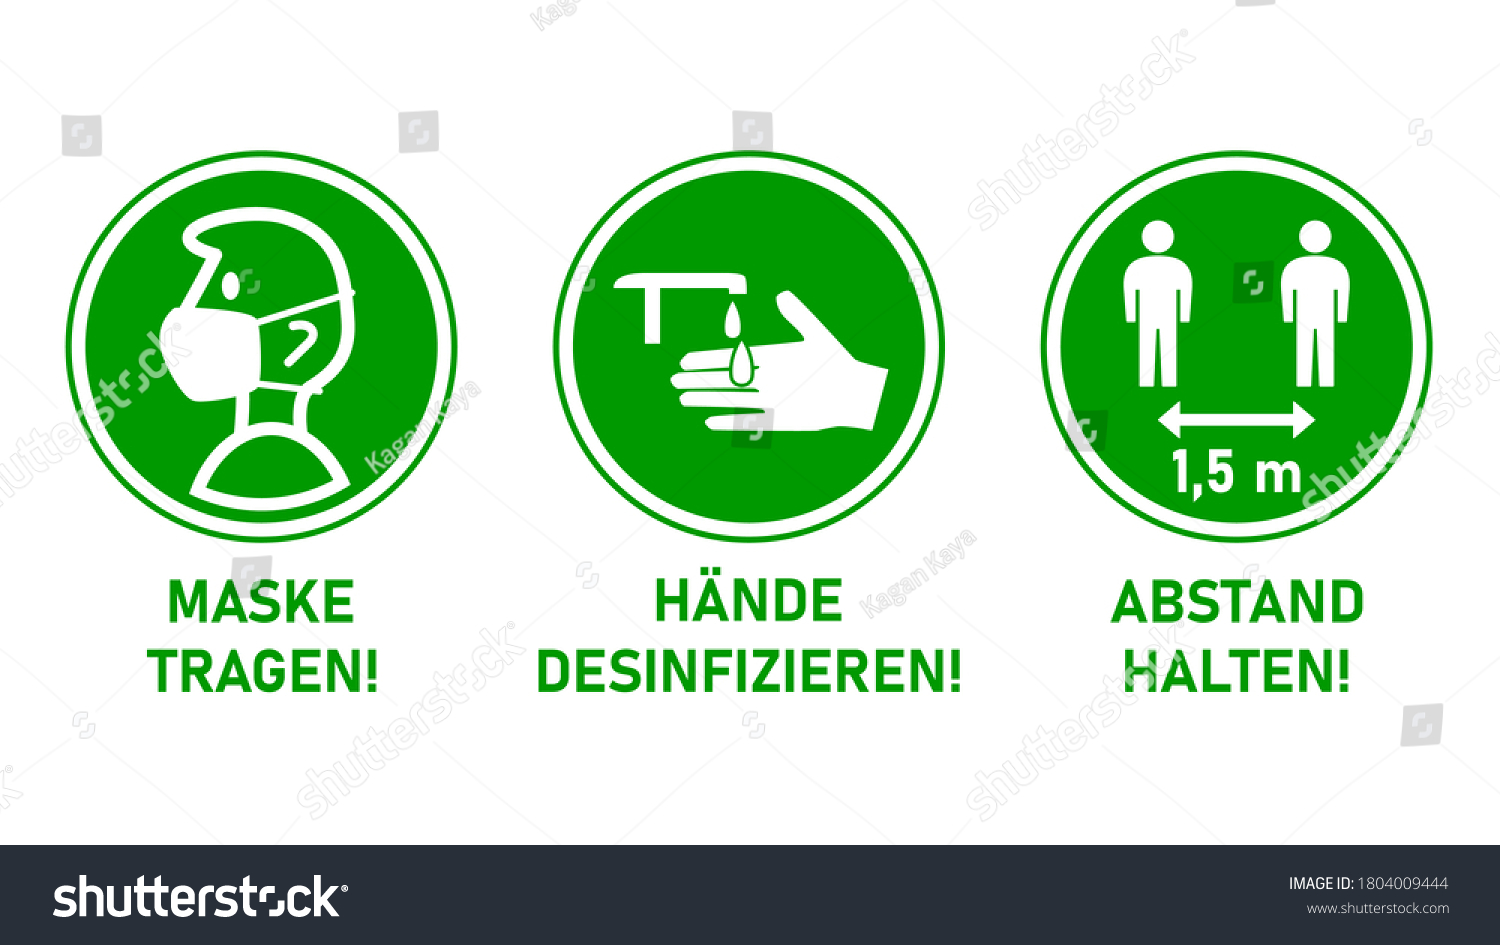 Round Instruction Signs in German with Basic Set of Measures against the Spread of Coronavirus Covid-19 including Wear a Mask, Sanitize Hands and Keep Distance 1,5 m or 1,5 Meters. Vector Image. #1804009444